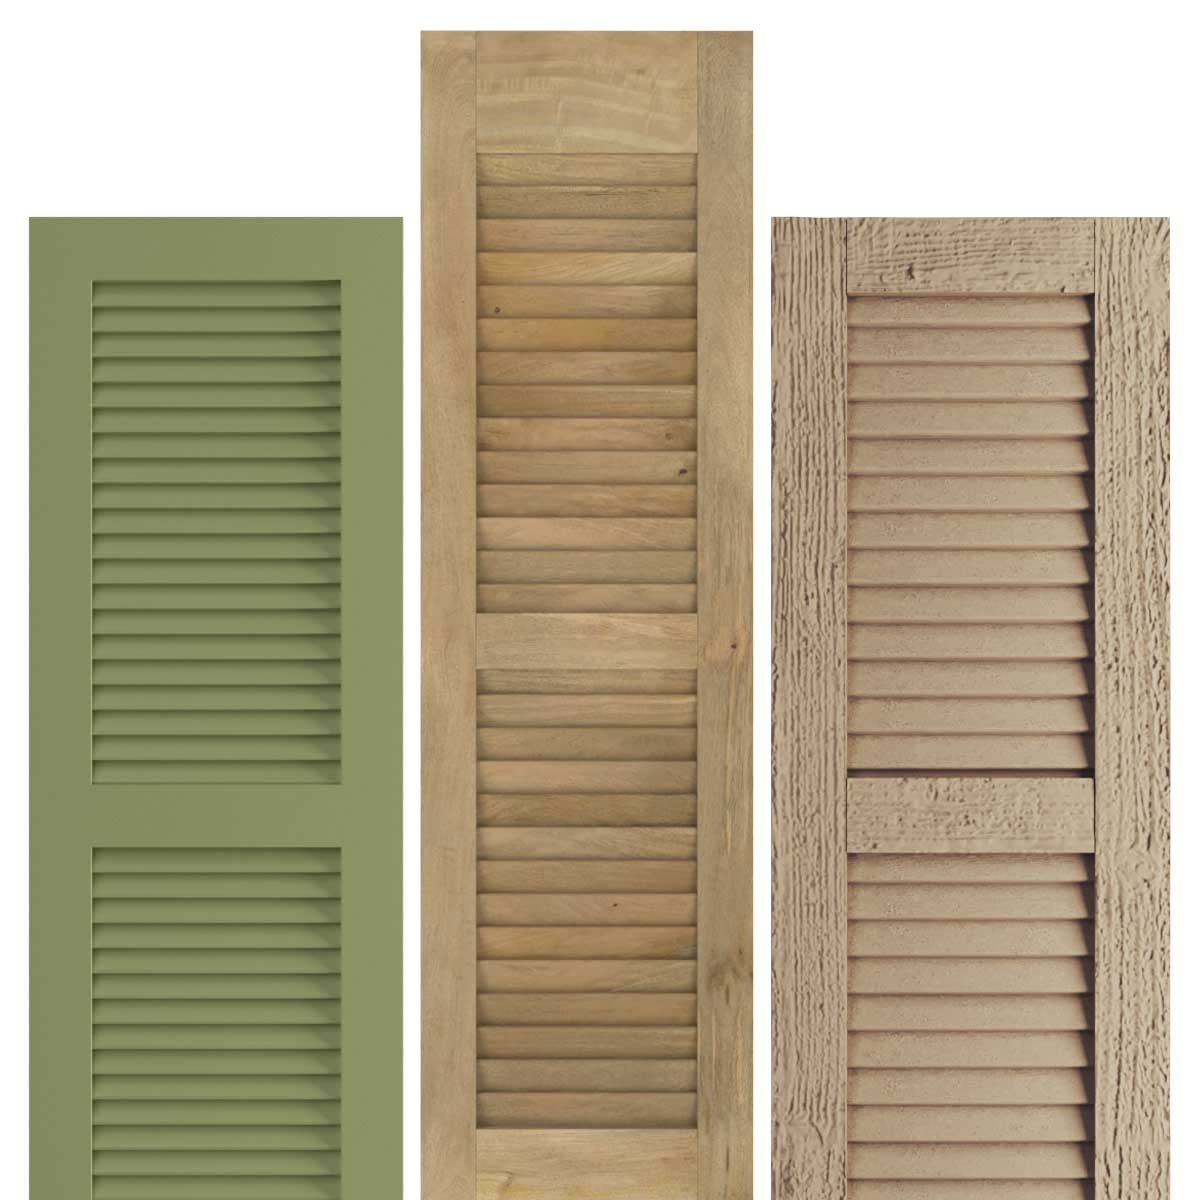 Shop By Material - Diverse Range of Shutter Materials | BuyShutters.com